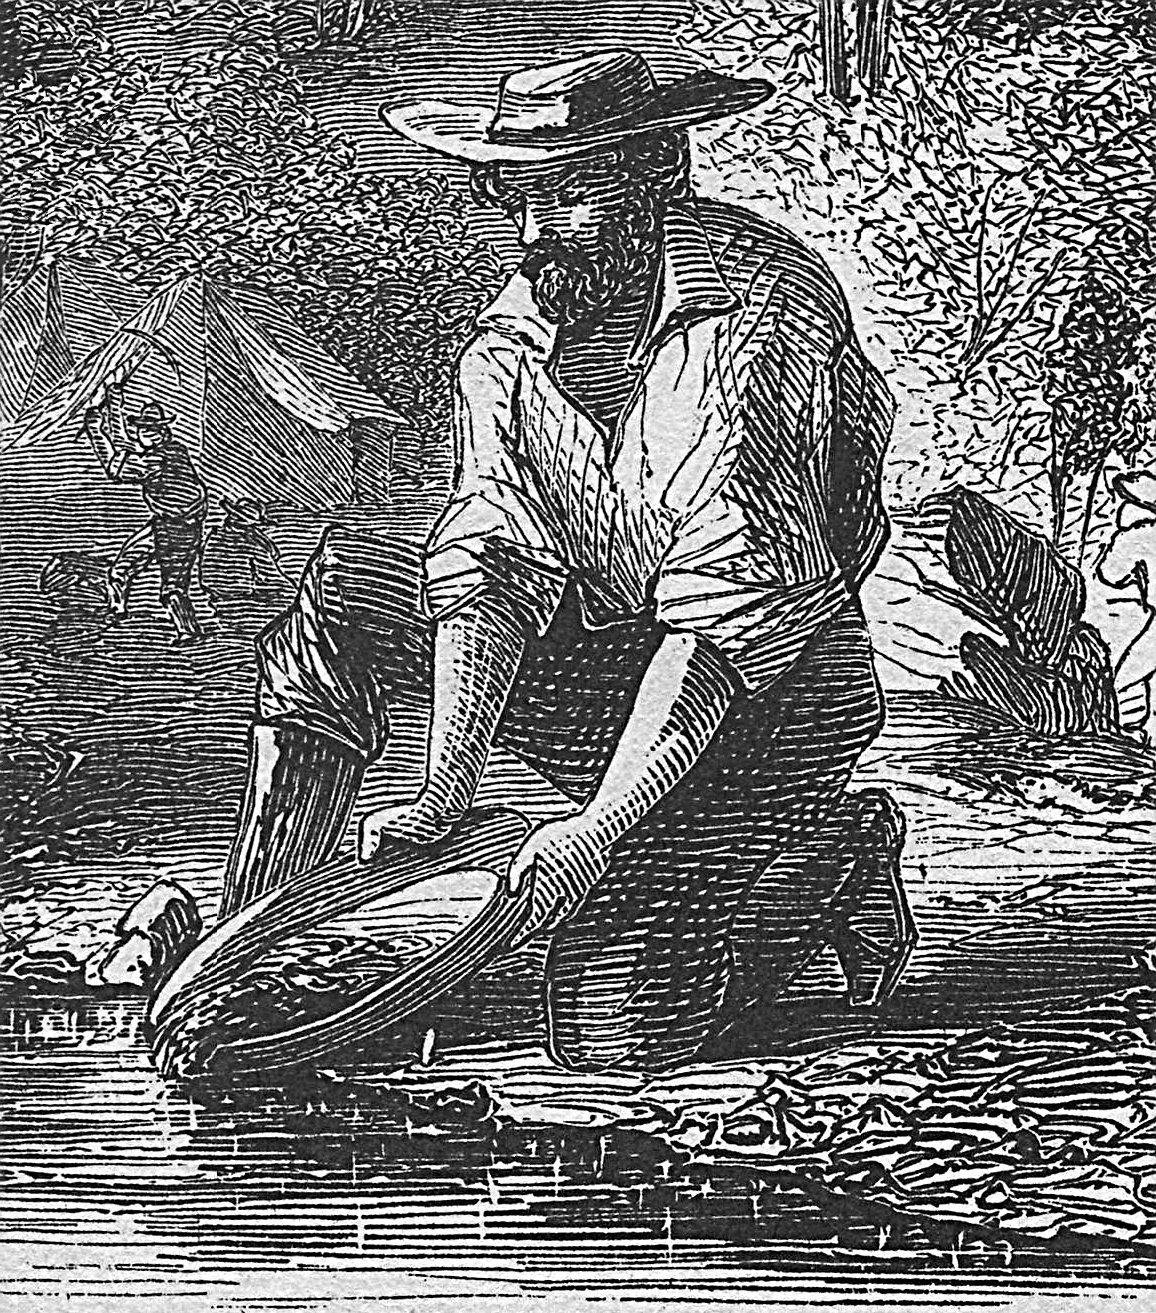 Panning for gold on the Mokelumne River. Harper's Weekly: How We Got Gold in California. April 1860